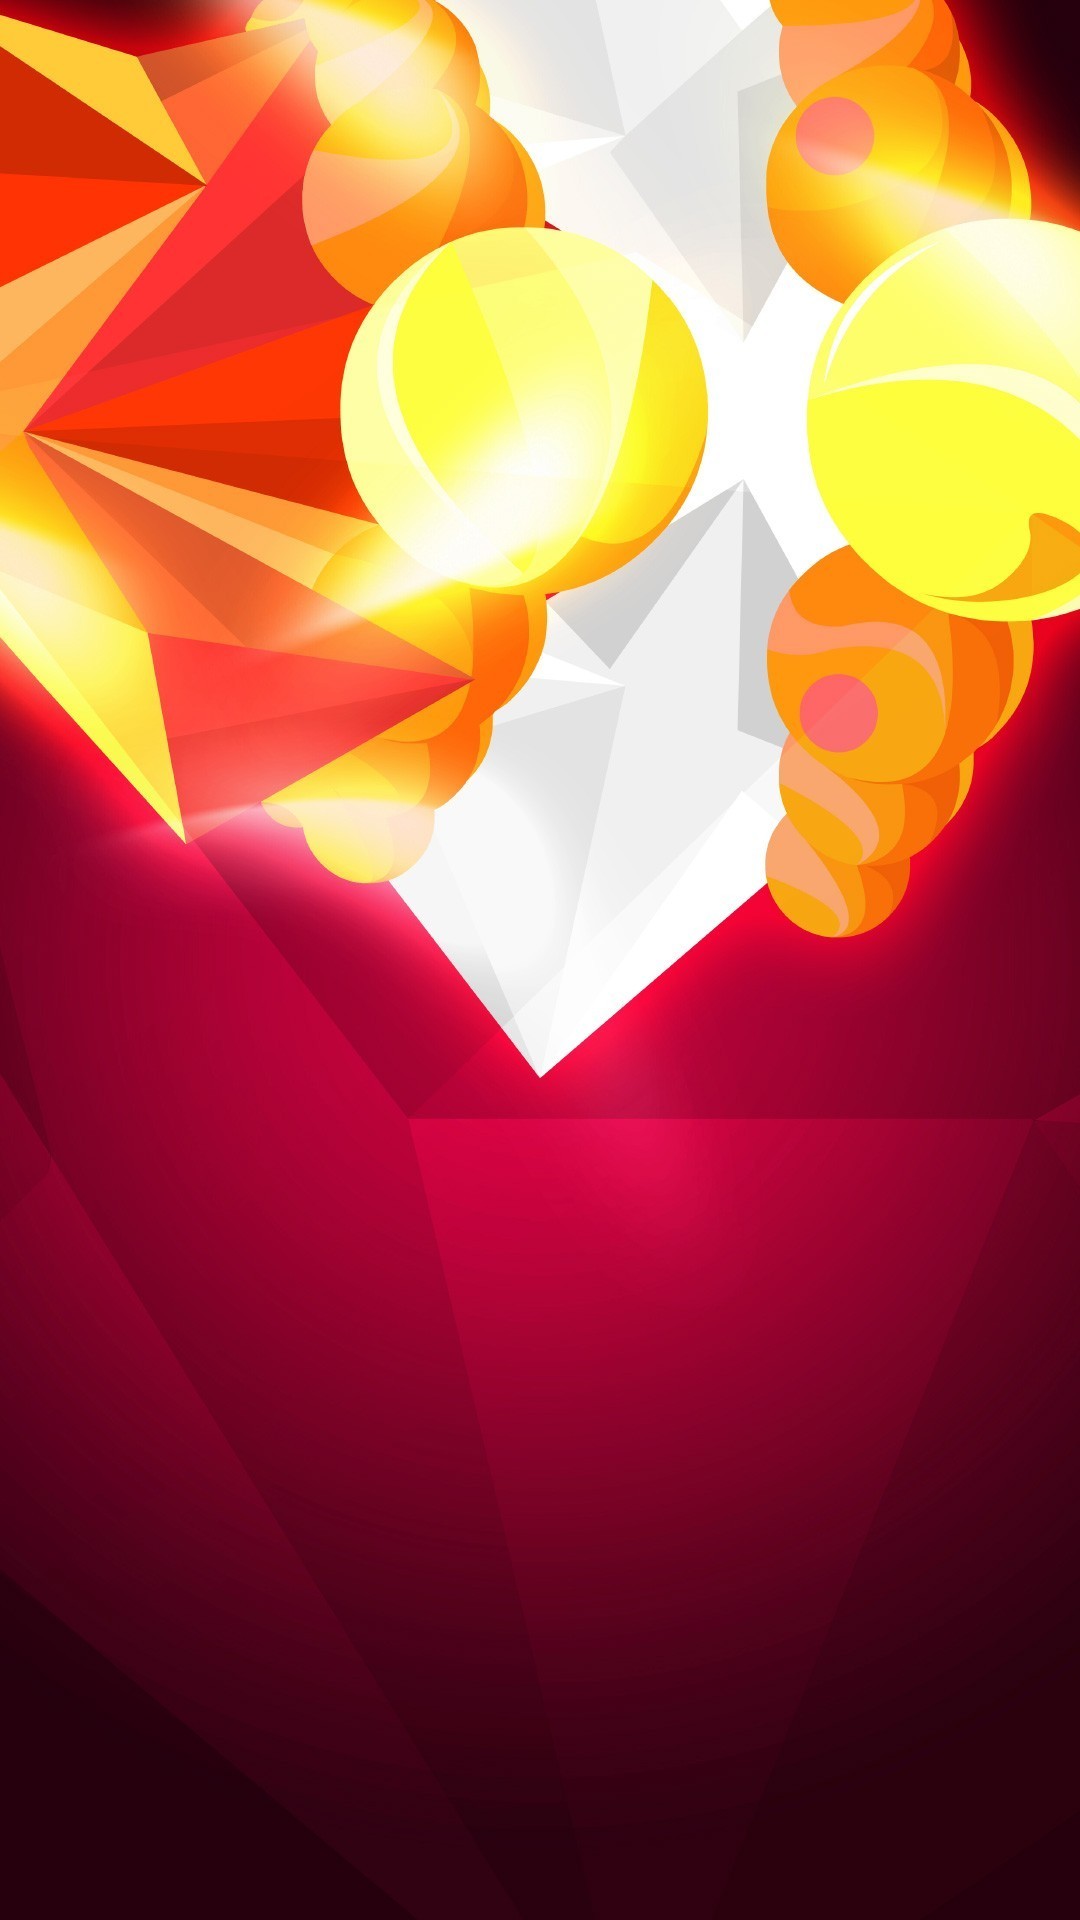 1080x1920 Abstract Orange Crystals Android Wallpaper ...